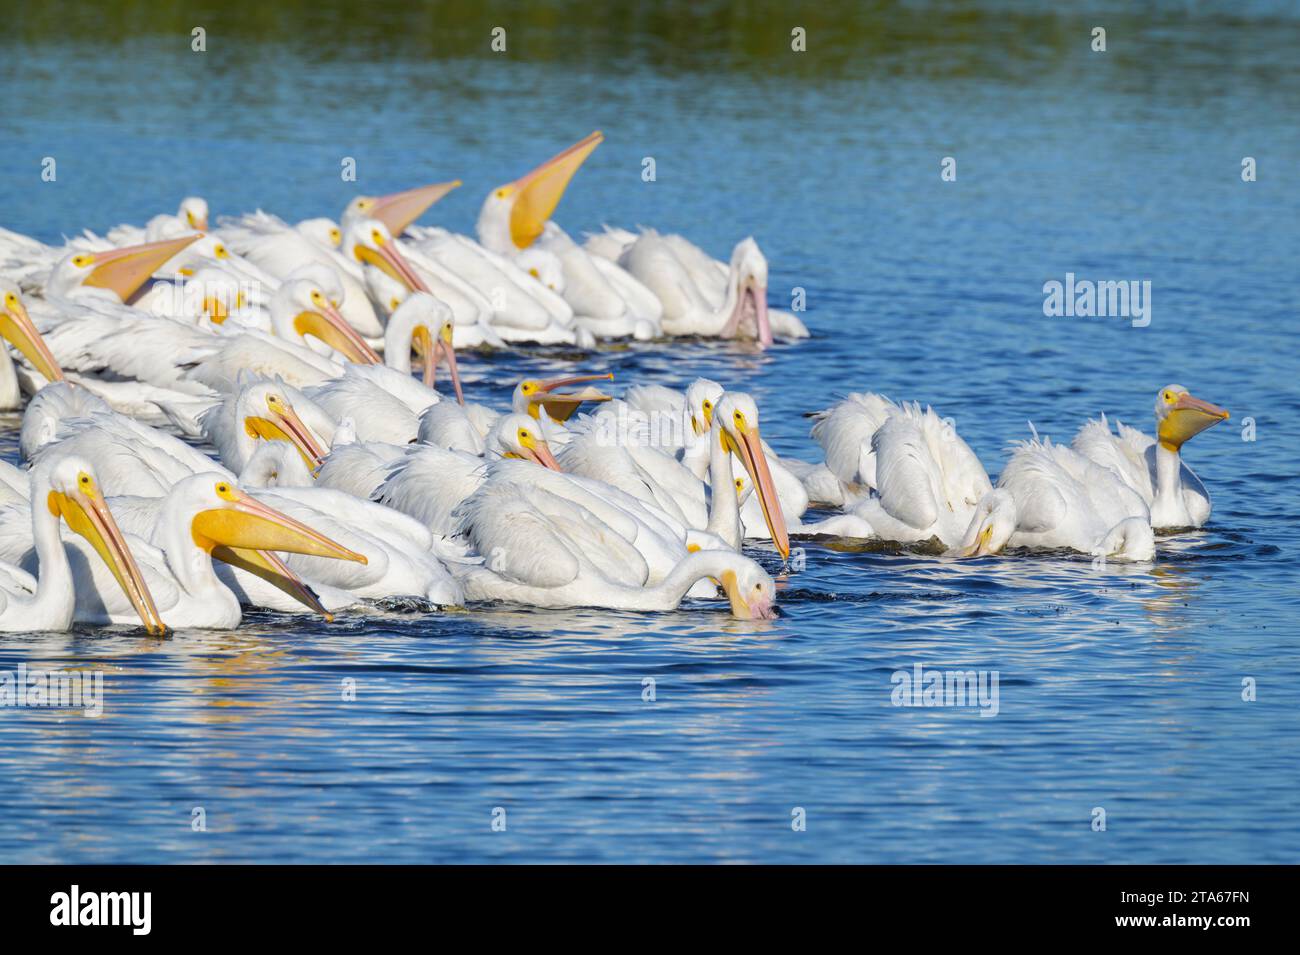 American white pelican (Pelecanus erythrorhynchos) flock of adults fishing together on water in Magrove swamp, Merrit Island, Florida, USA. Stock Photo